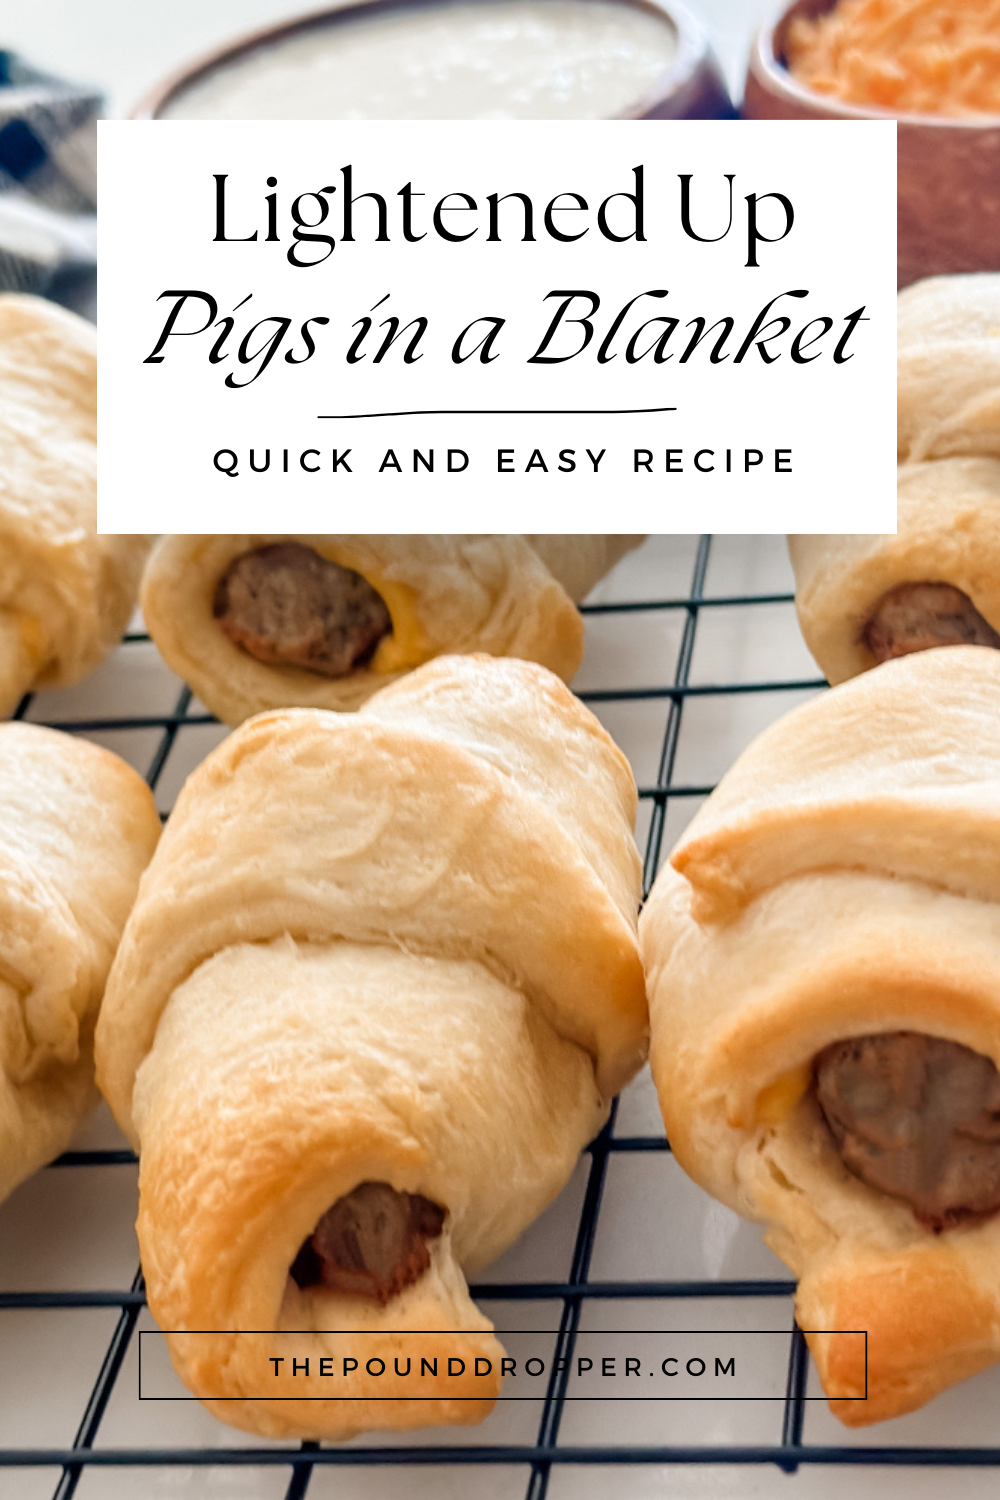 These Lightened Up Pigs in a Blanket are perfect for those busy weekday mornings, weekend brunch, or as a mid-afternoon snack! via @pounddropper